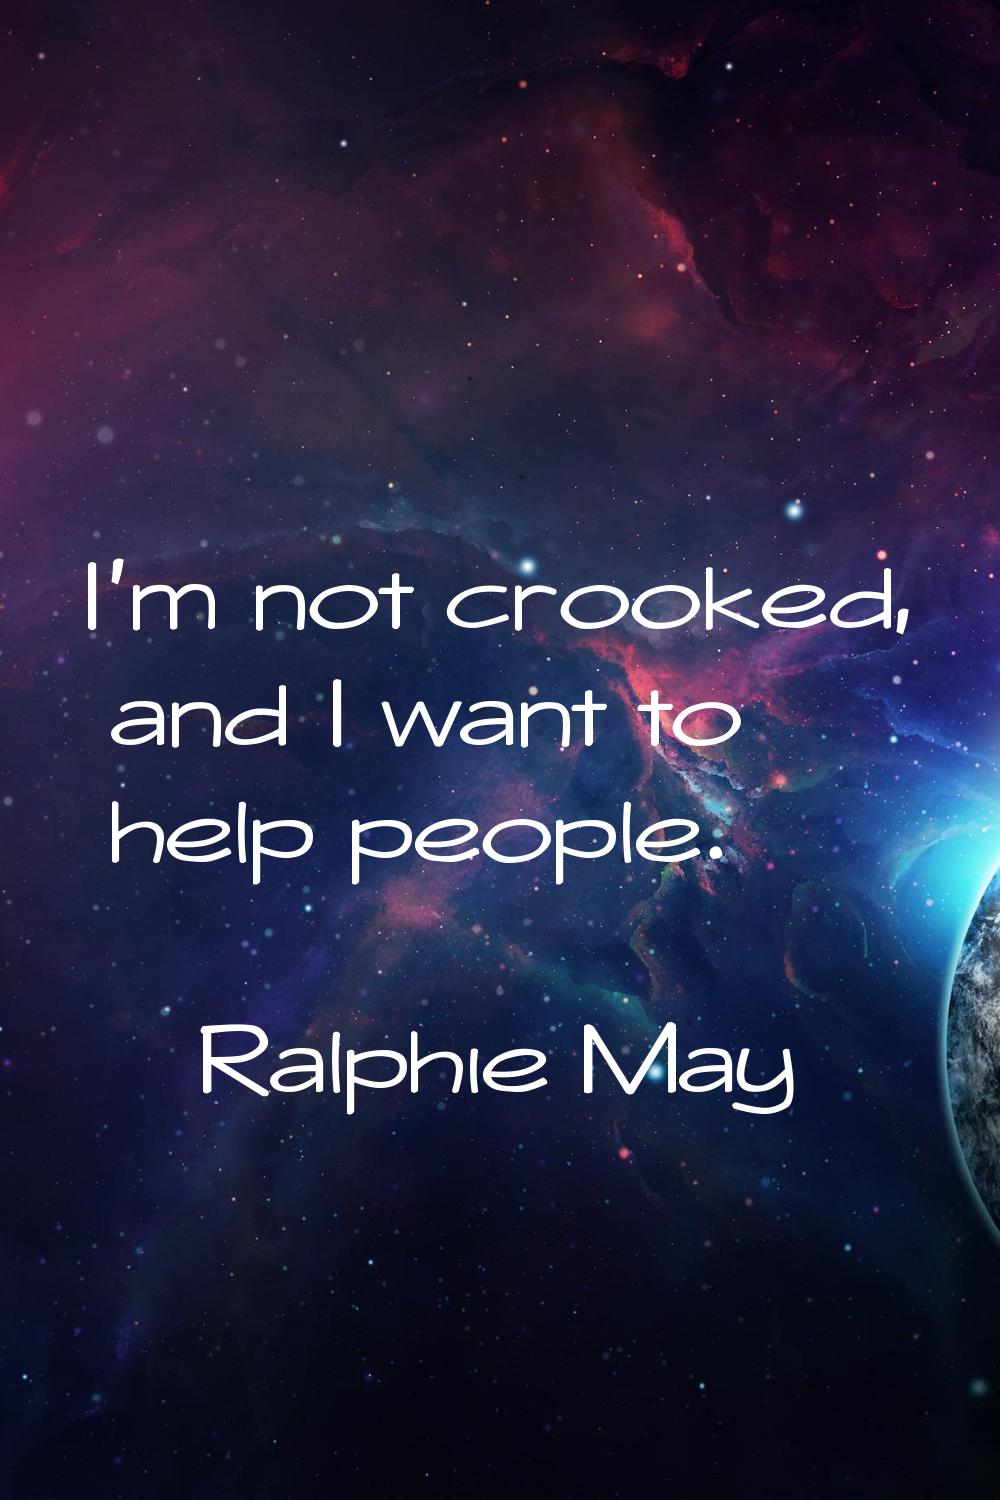 I'm not crooked, and I want to help people.